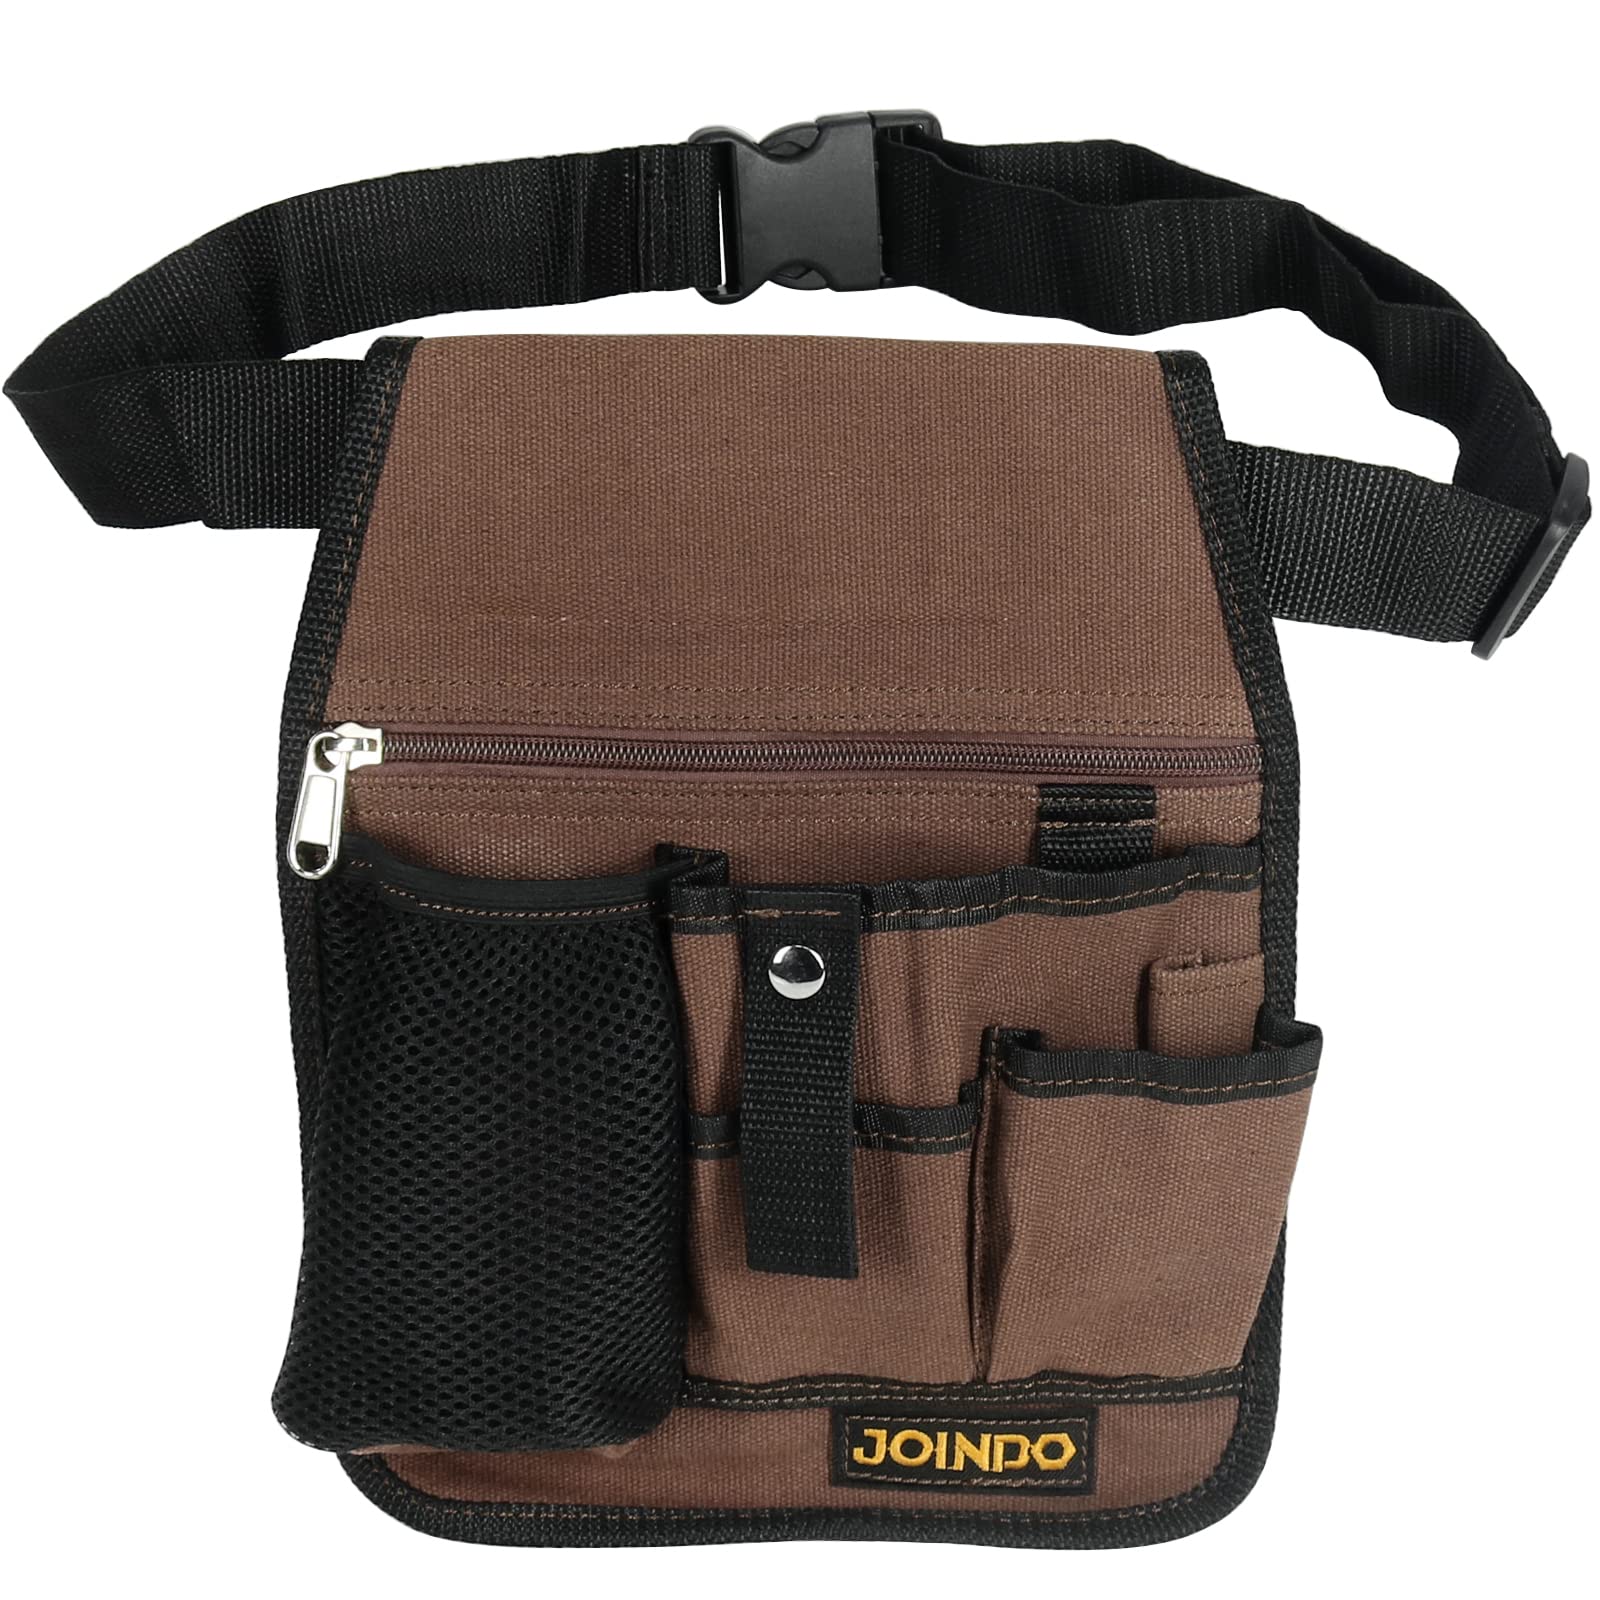 JOINDO Garden Tool Pouch